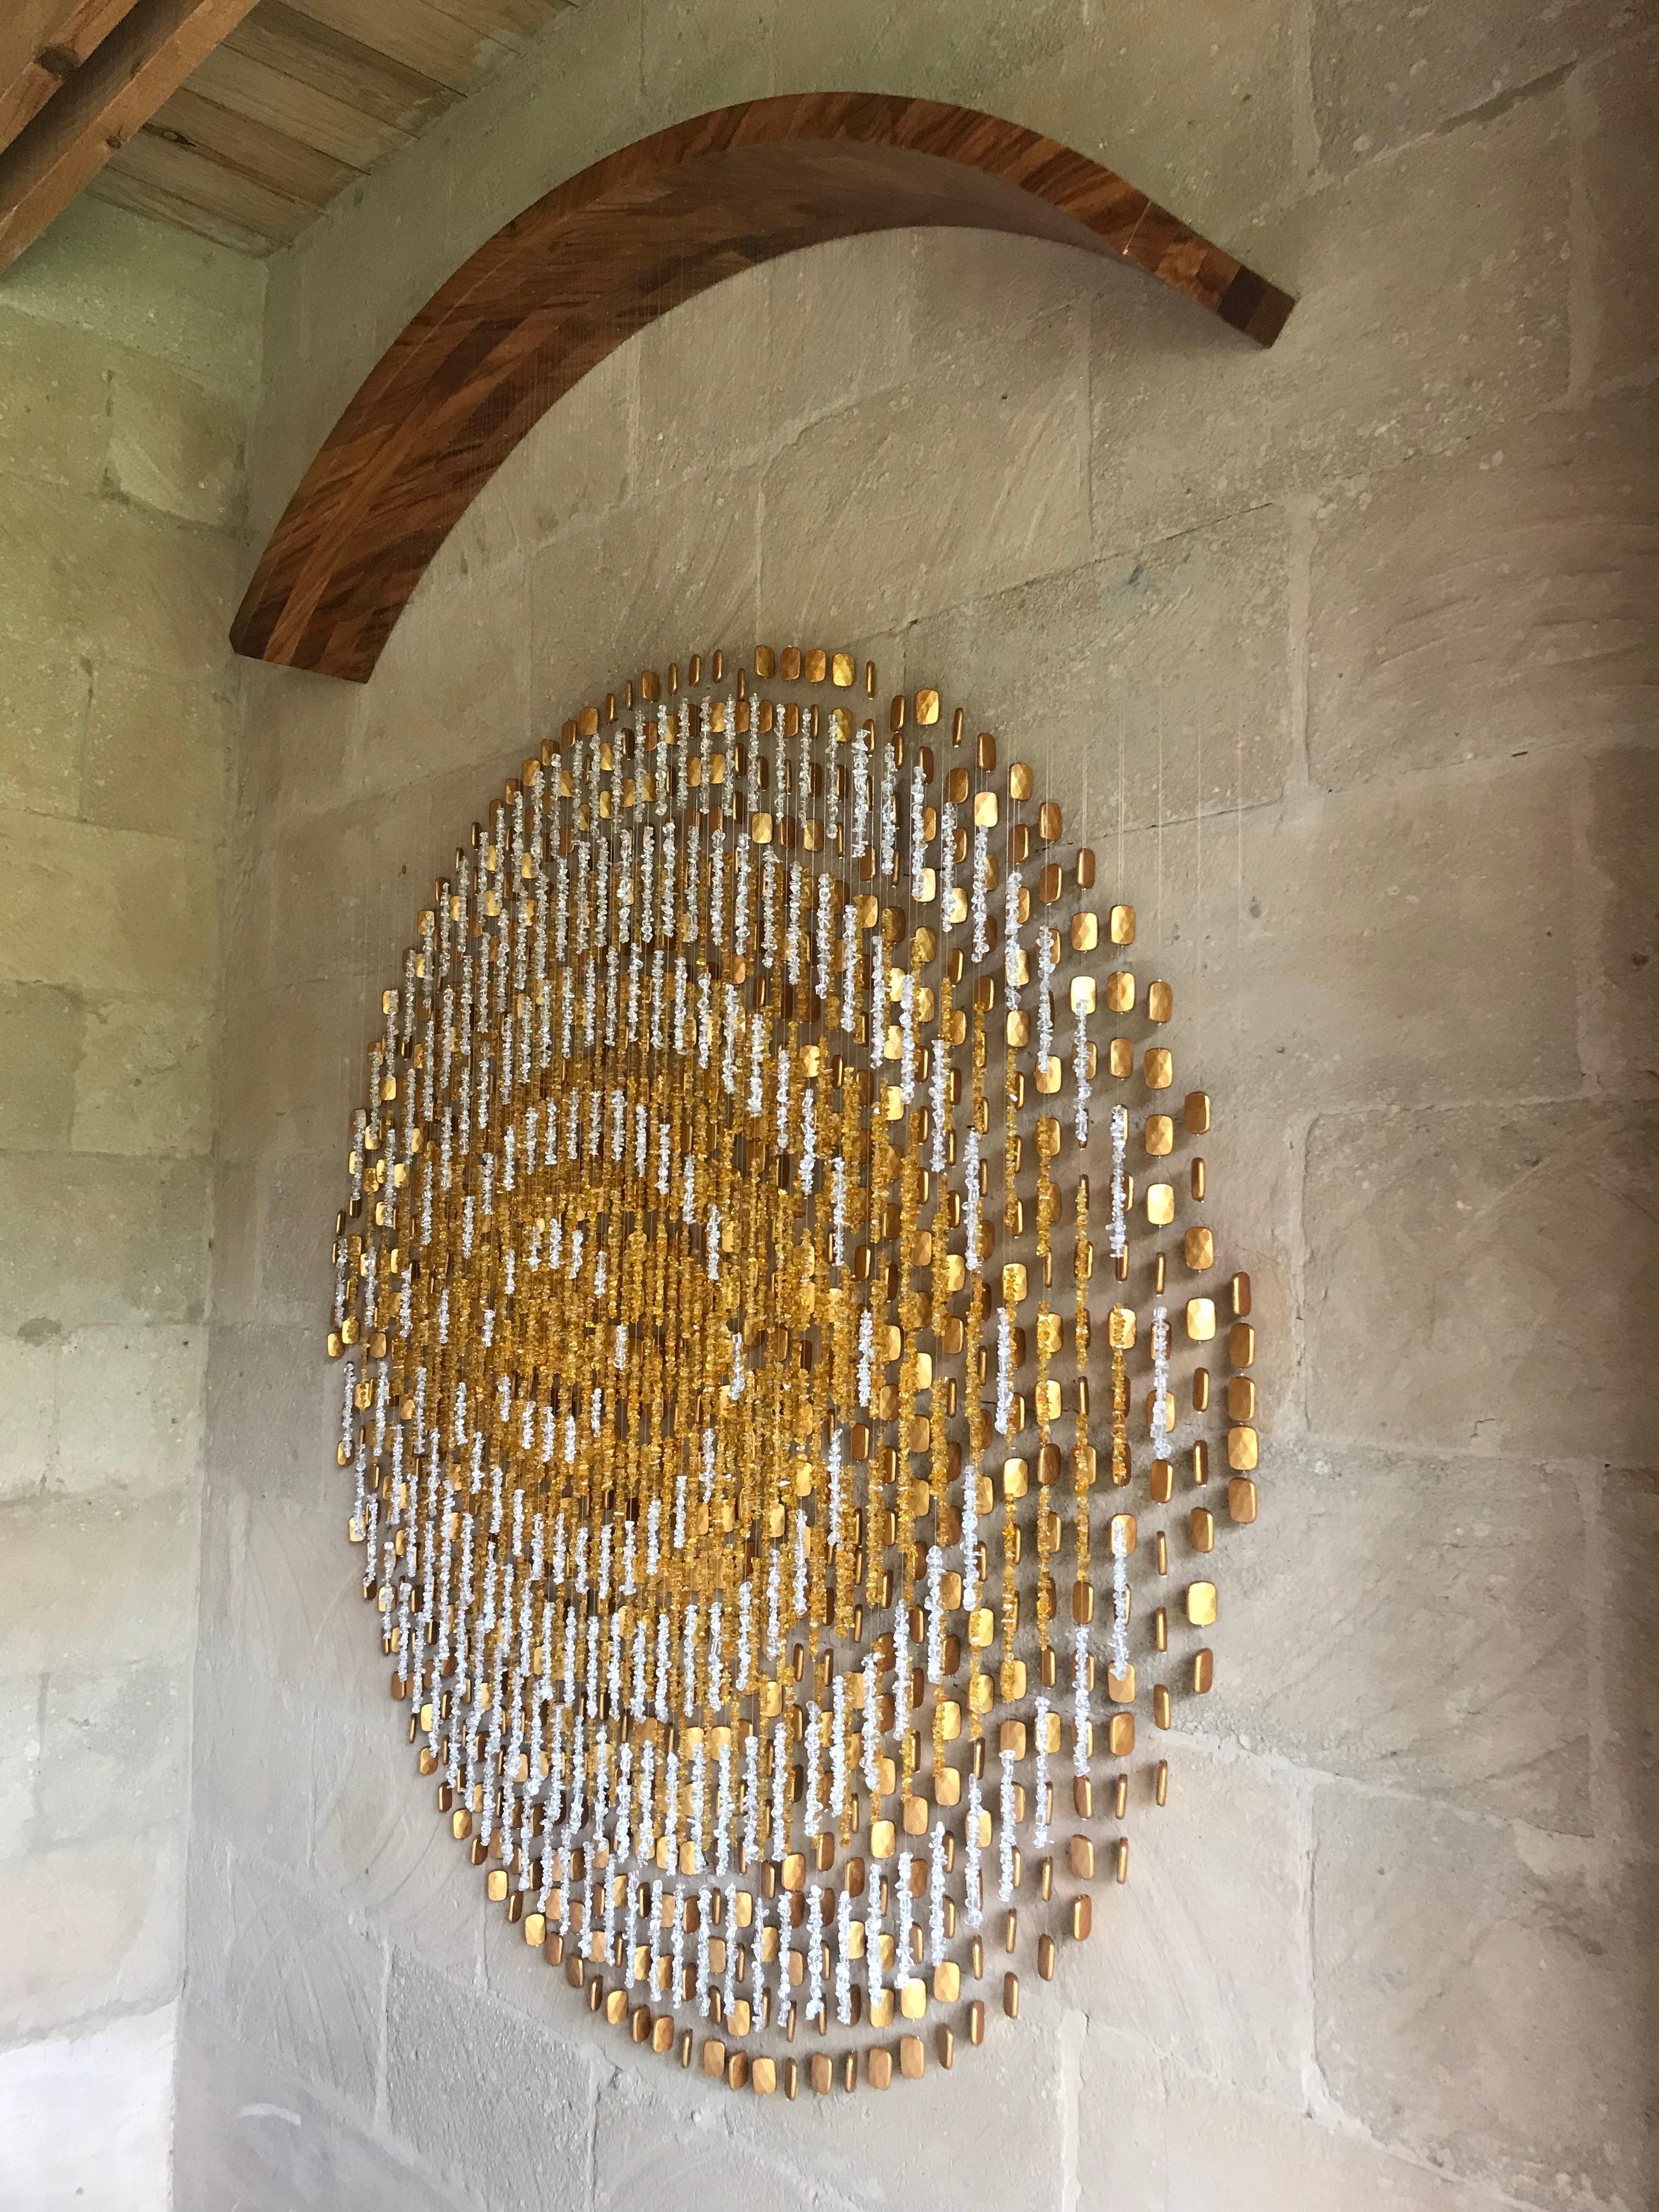 Elegant Pieces Forming 7 Concentric Circles Hanging from a Solid Wood Arch - Sculpture by Arozarena De La Fuente